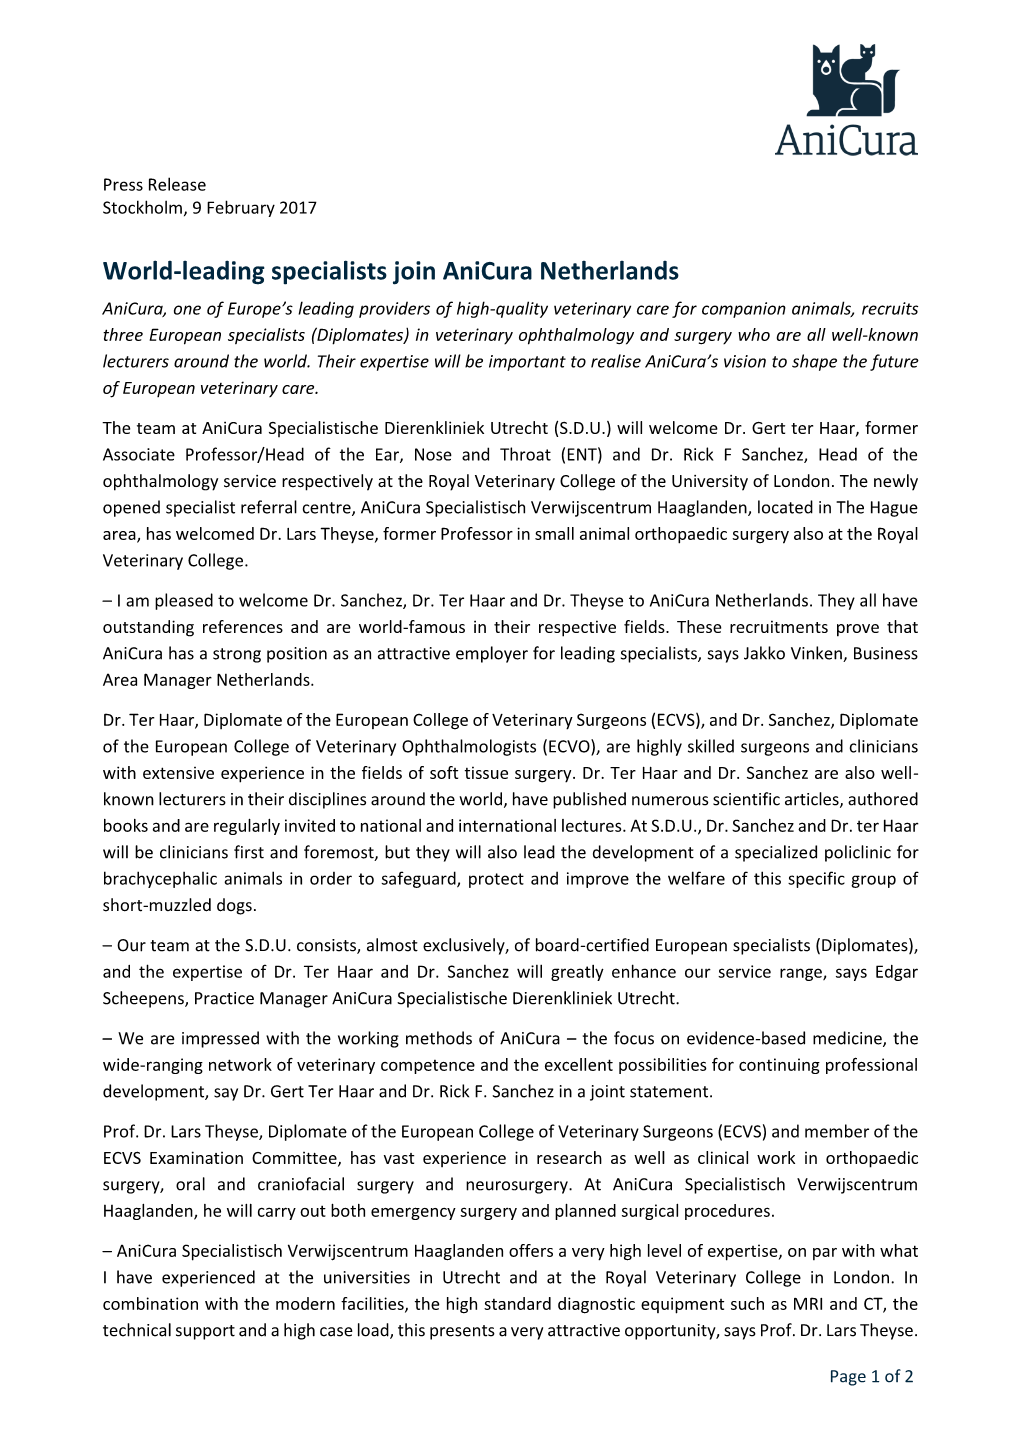 World-Leading Specialists Join Anicura Netherlands